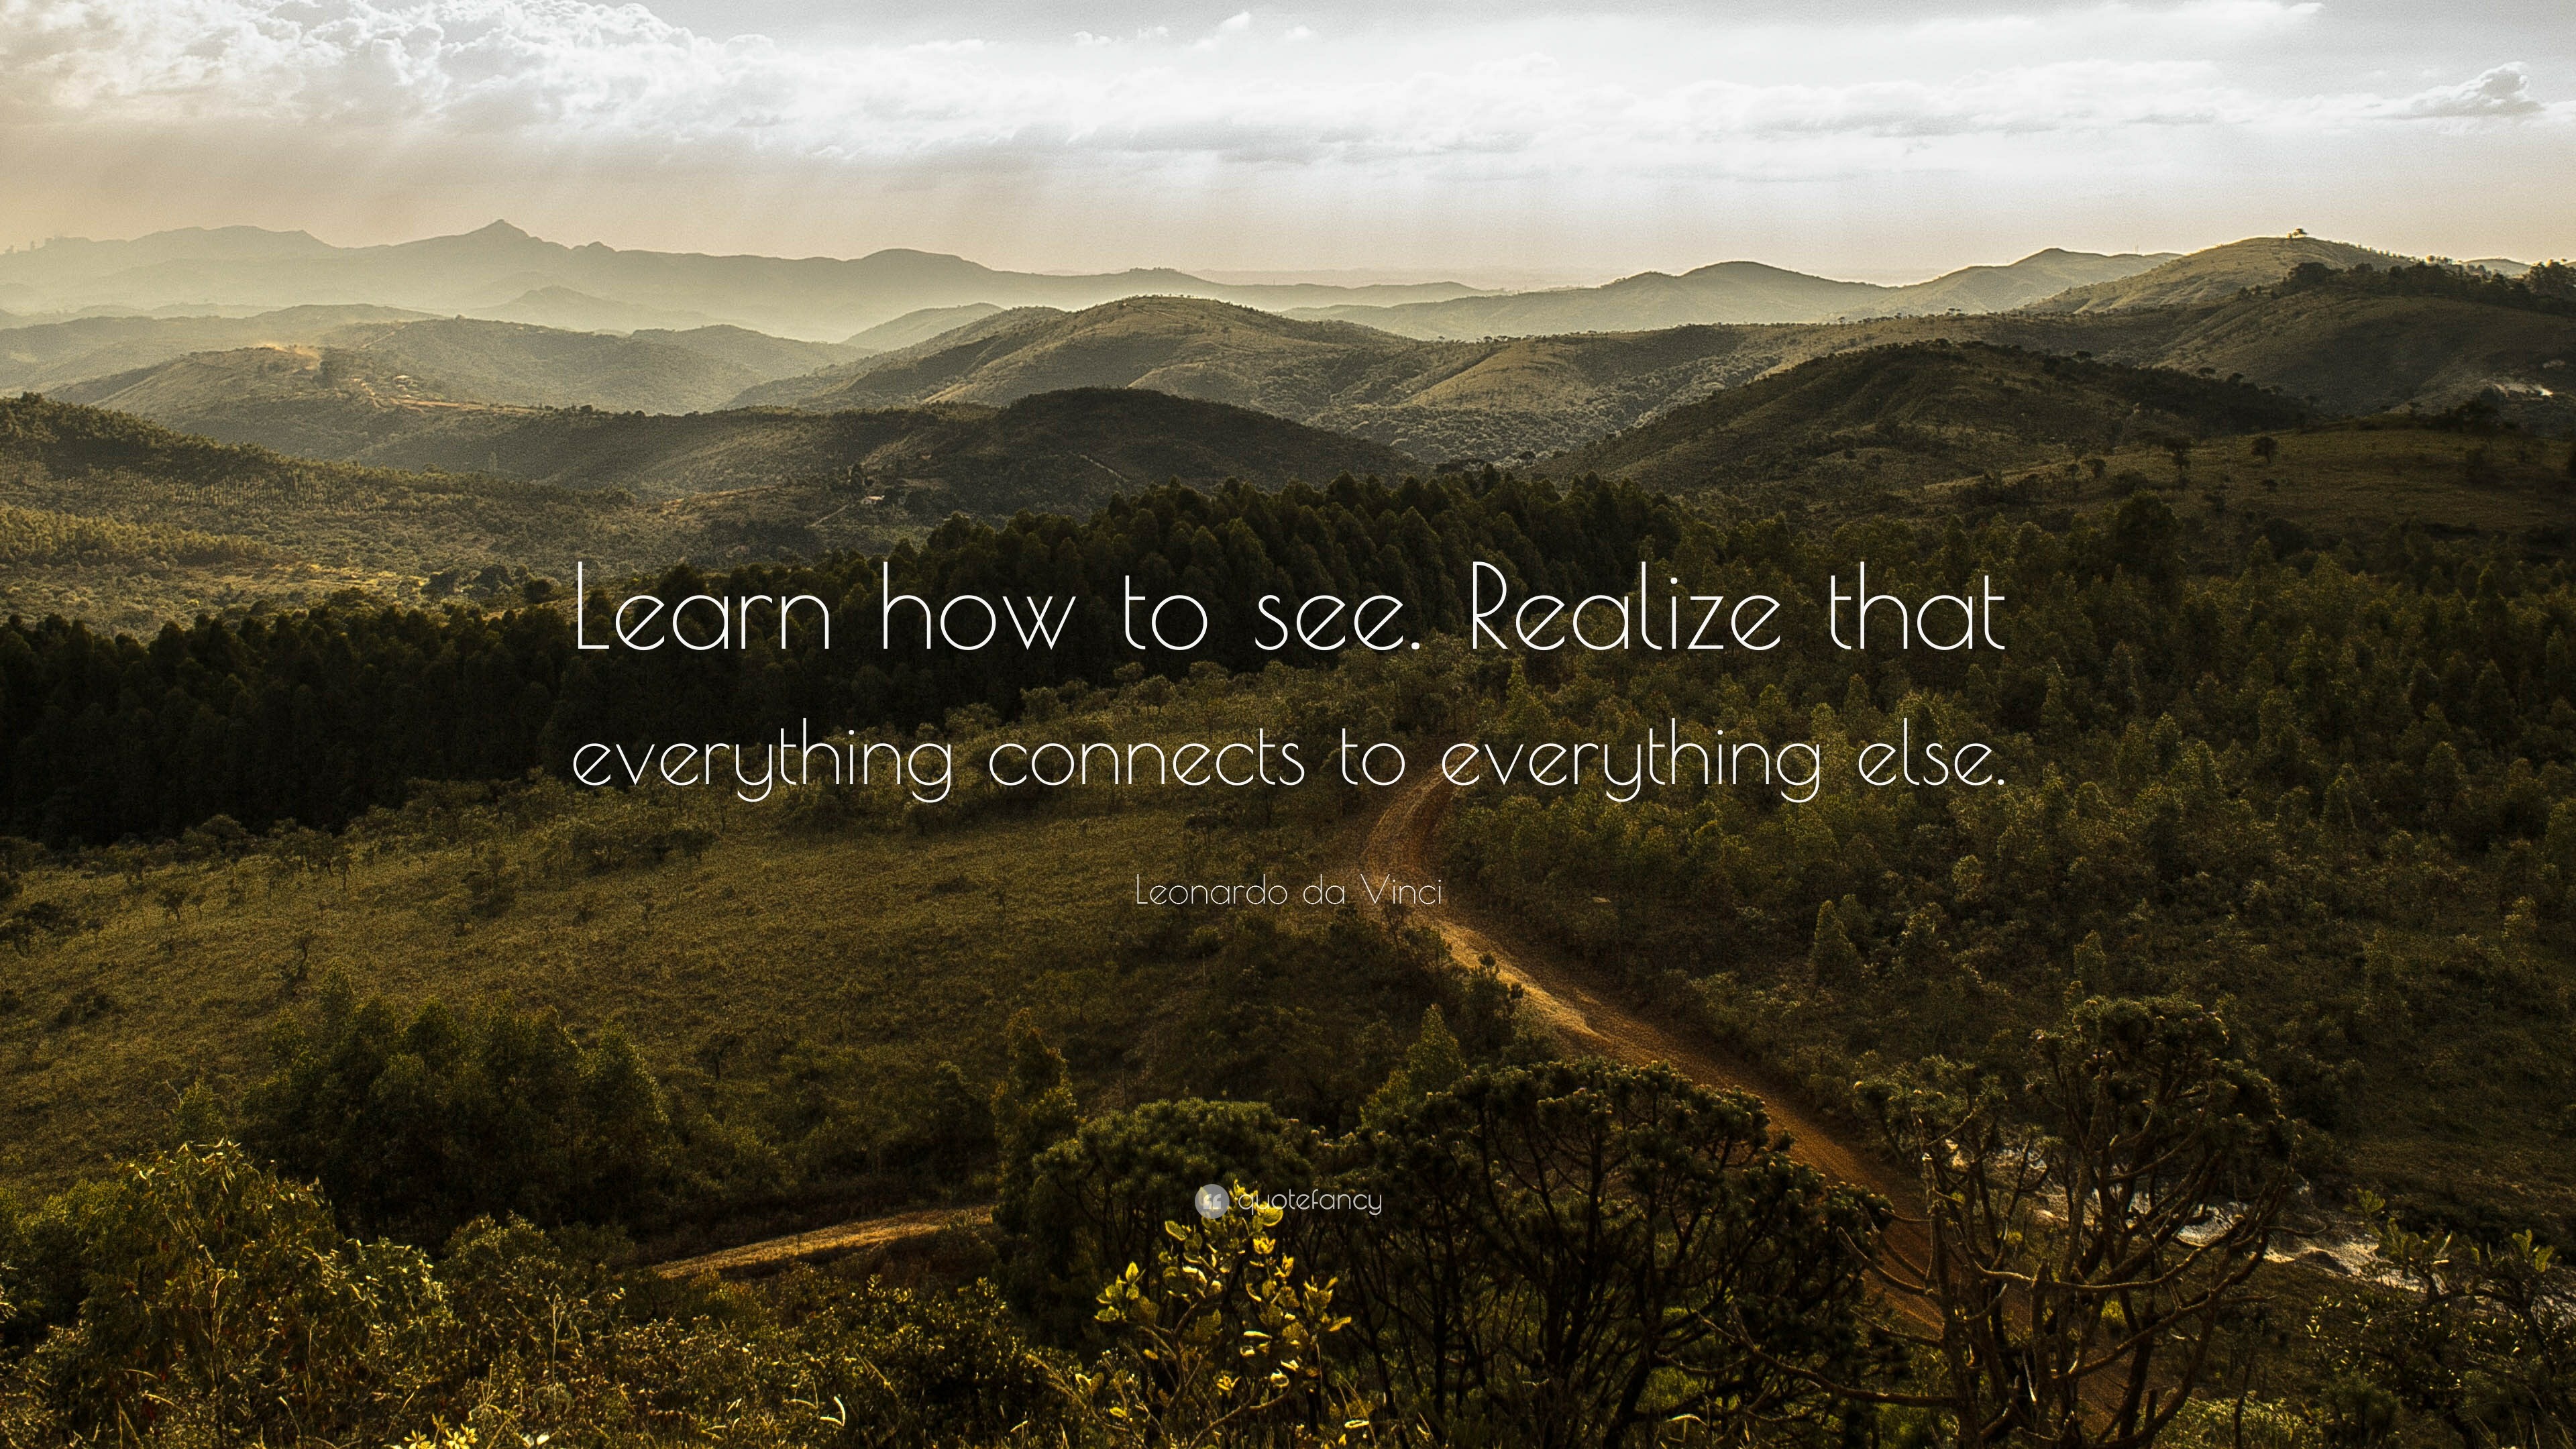 3840x2160 Leonardo da Vinci Quote: “Learn how to see. Realize that everything  connects to